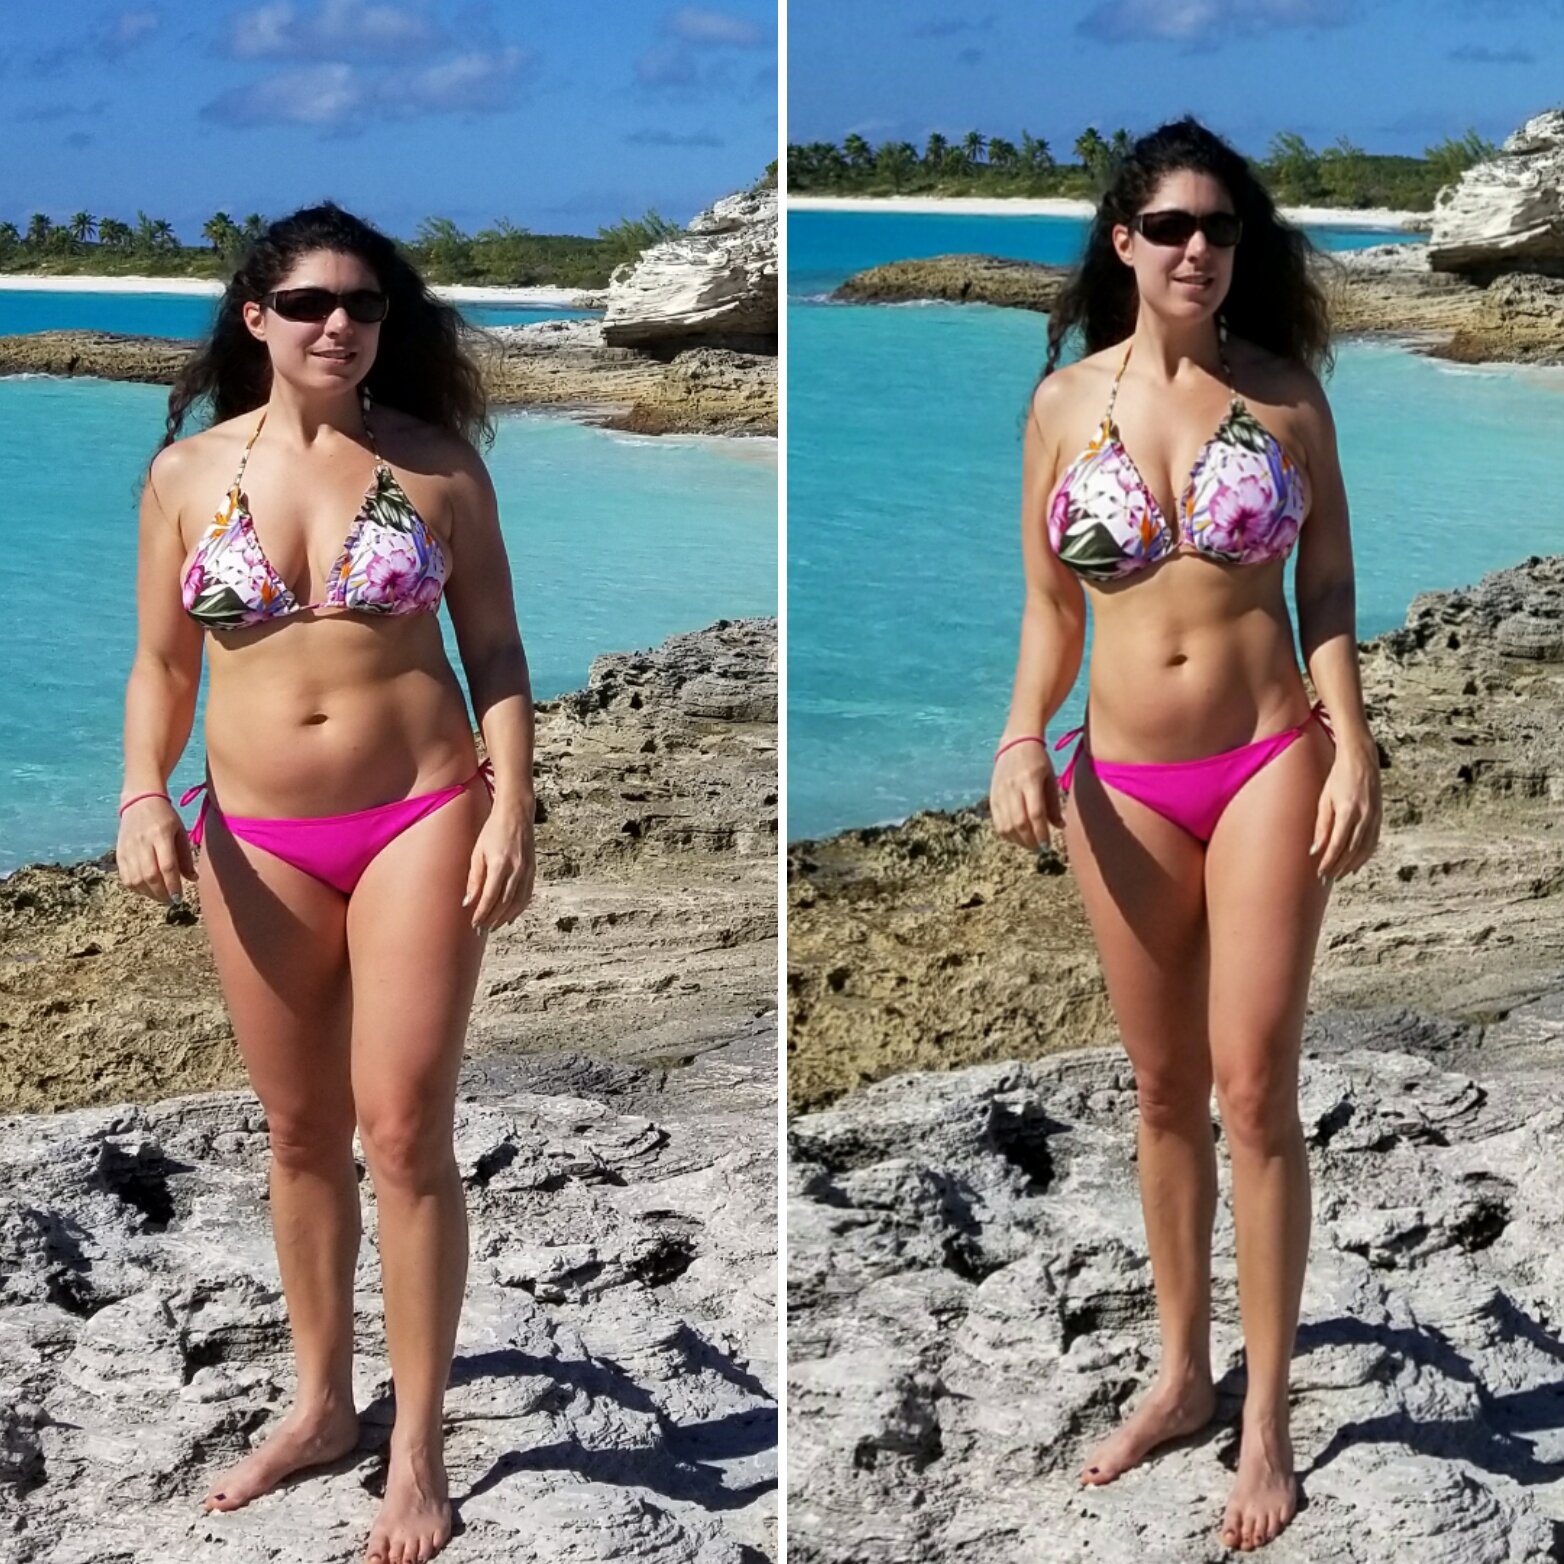 This is the same photo, doctored two different ways by a body-changing app on my phone. In the first photo, I made myself look larger. In the second, I created society’s “cultural ideal” of the female body. Point: when you look at other peoples’ pho…